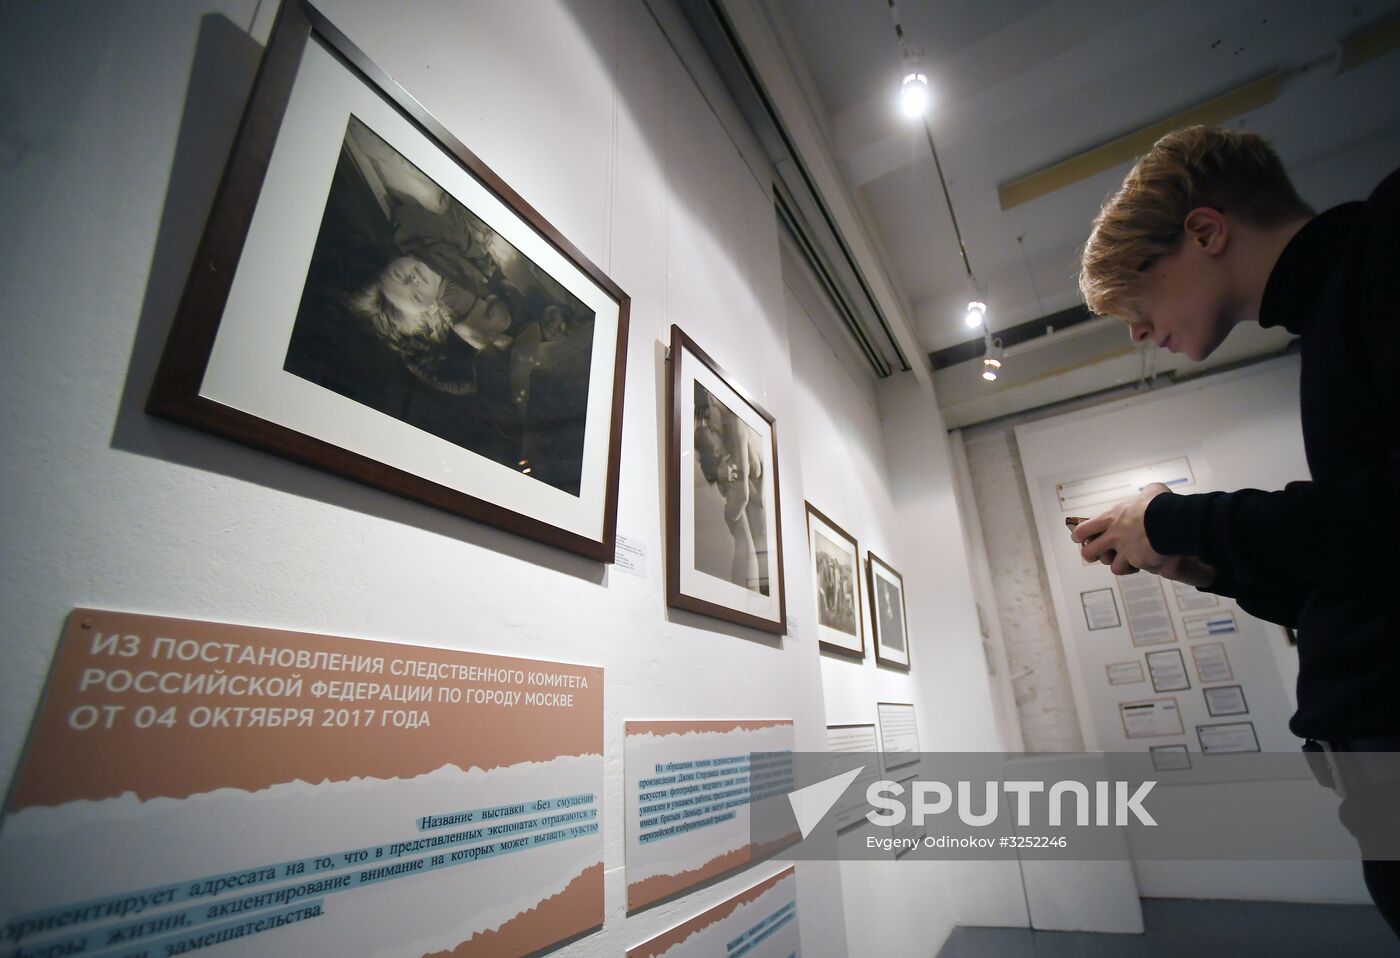 Without Embarrassment exhibition by US photographer Jock Sturges